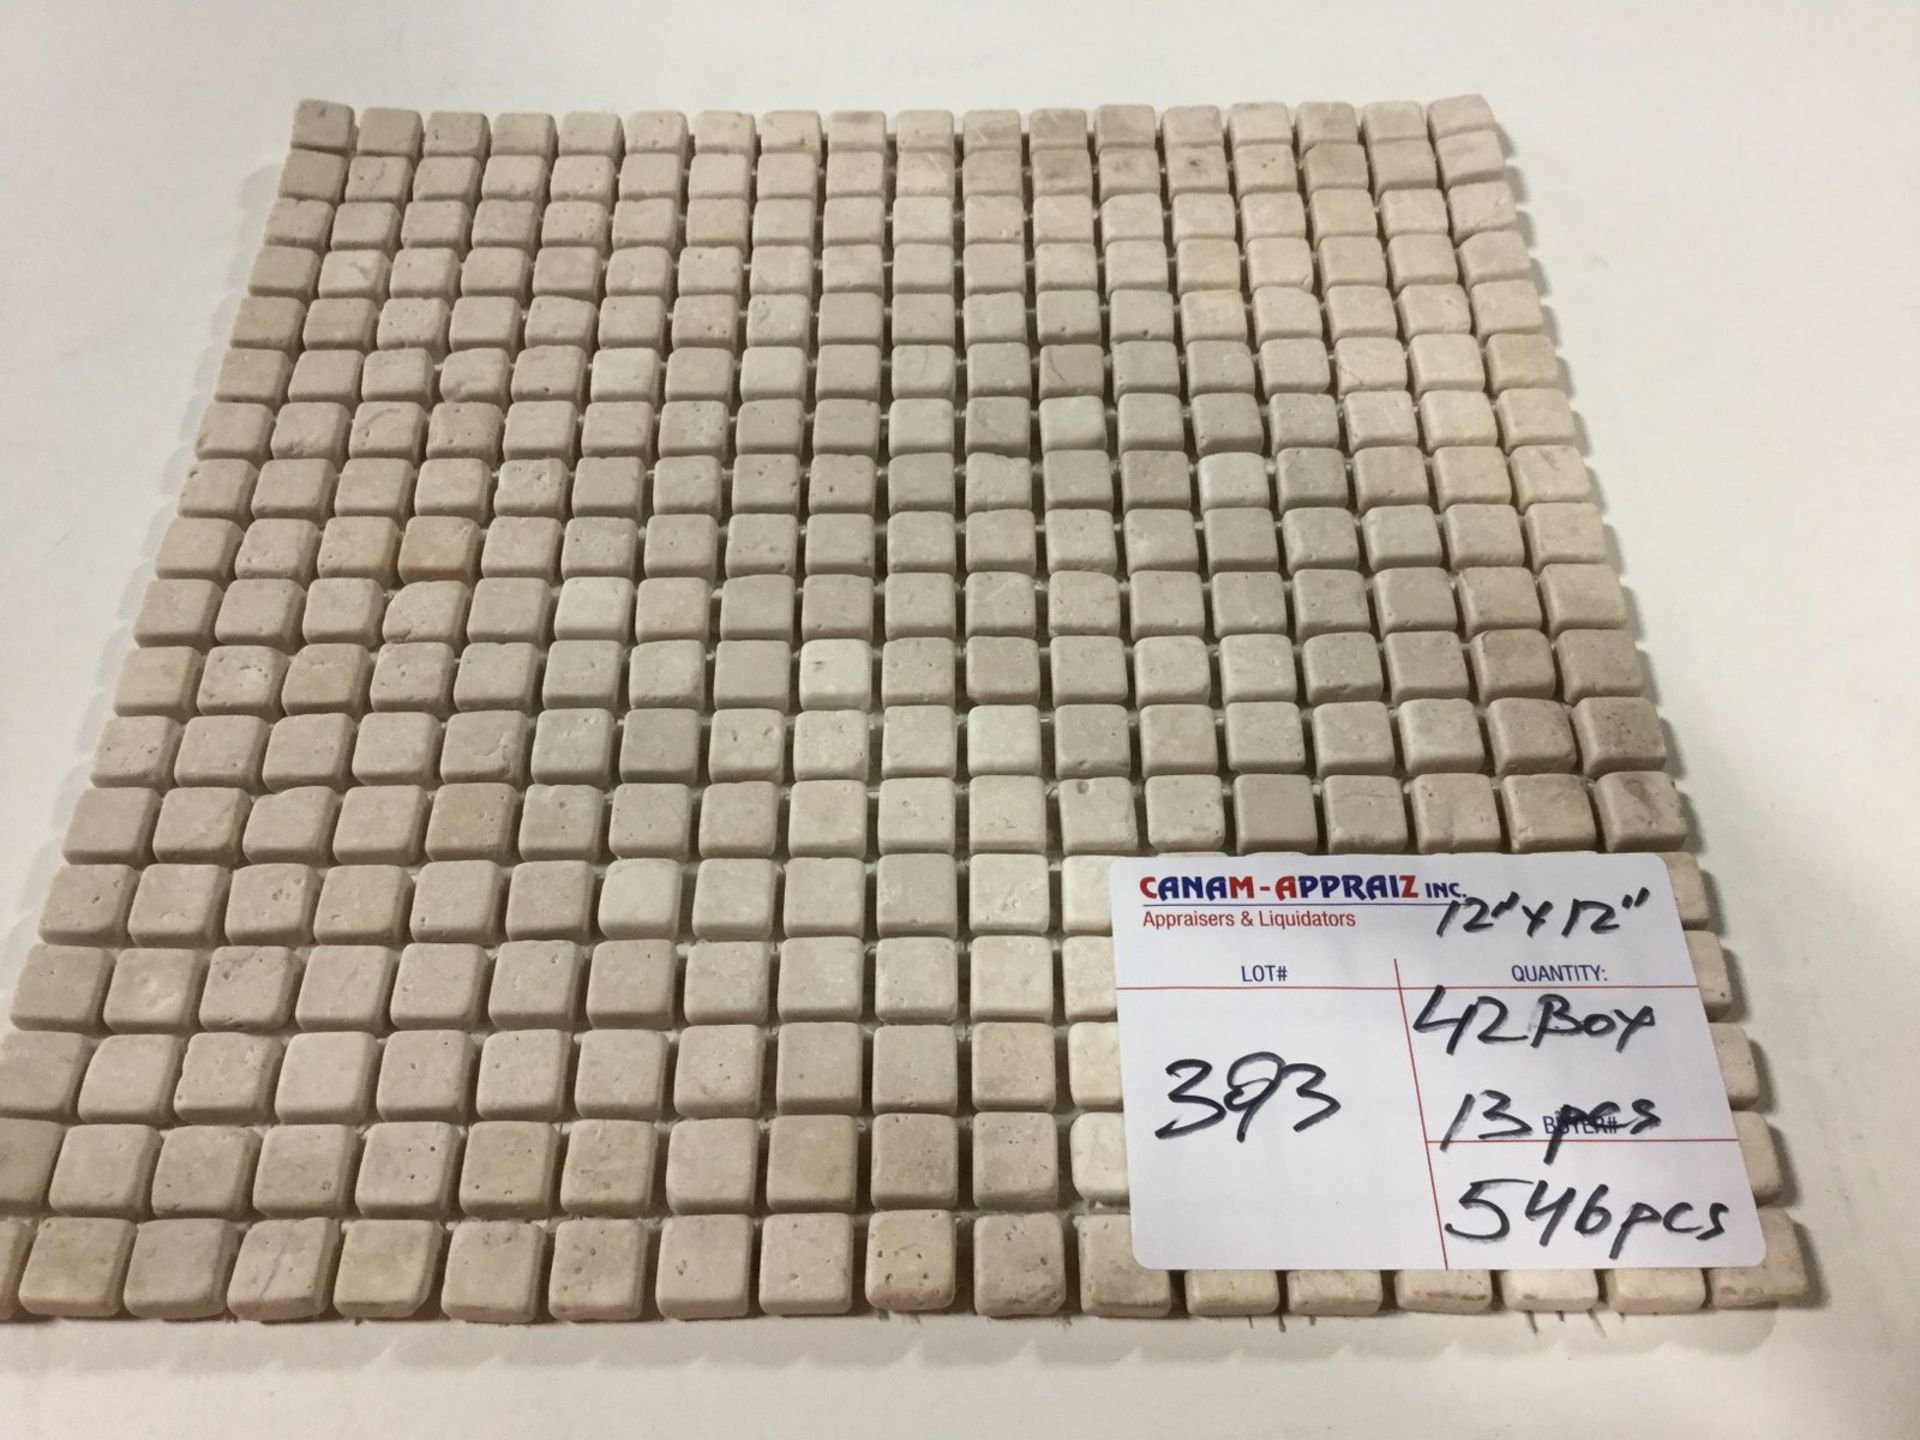 5/8"X5/8" EGYPTIAN BEIGE MARBLE HONED MOSAIC 546 PIECES OR SQ/FT, RETAIL $12.98 SQ/FT